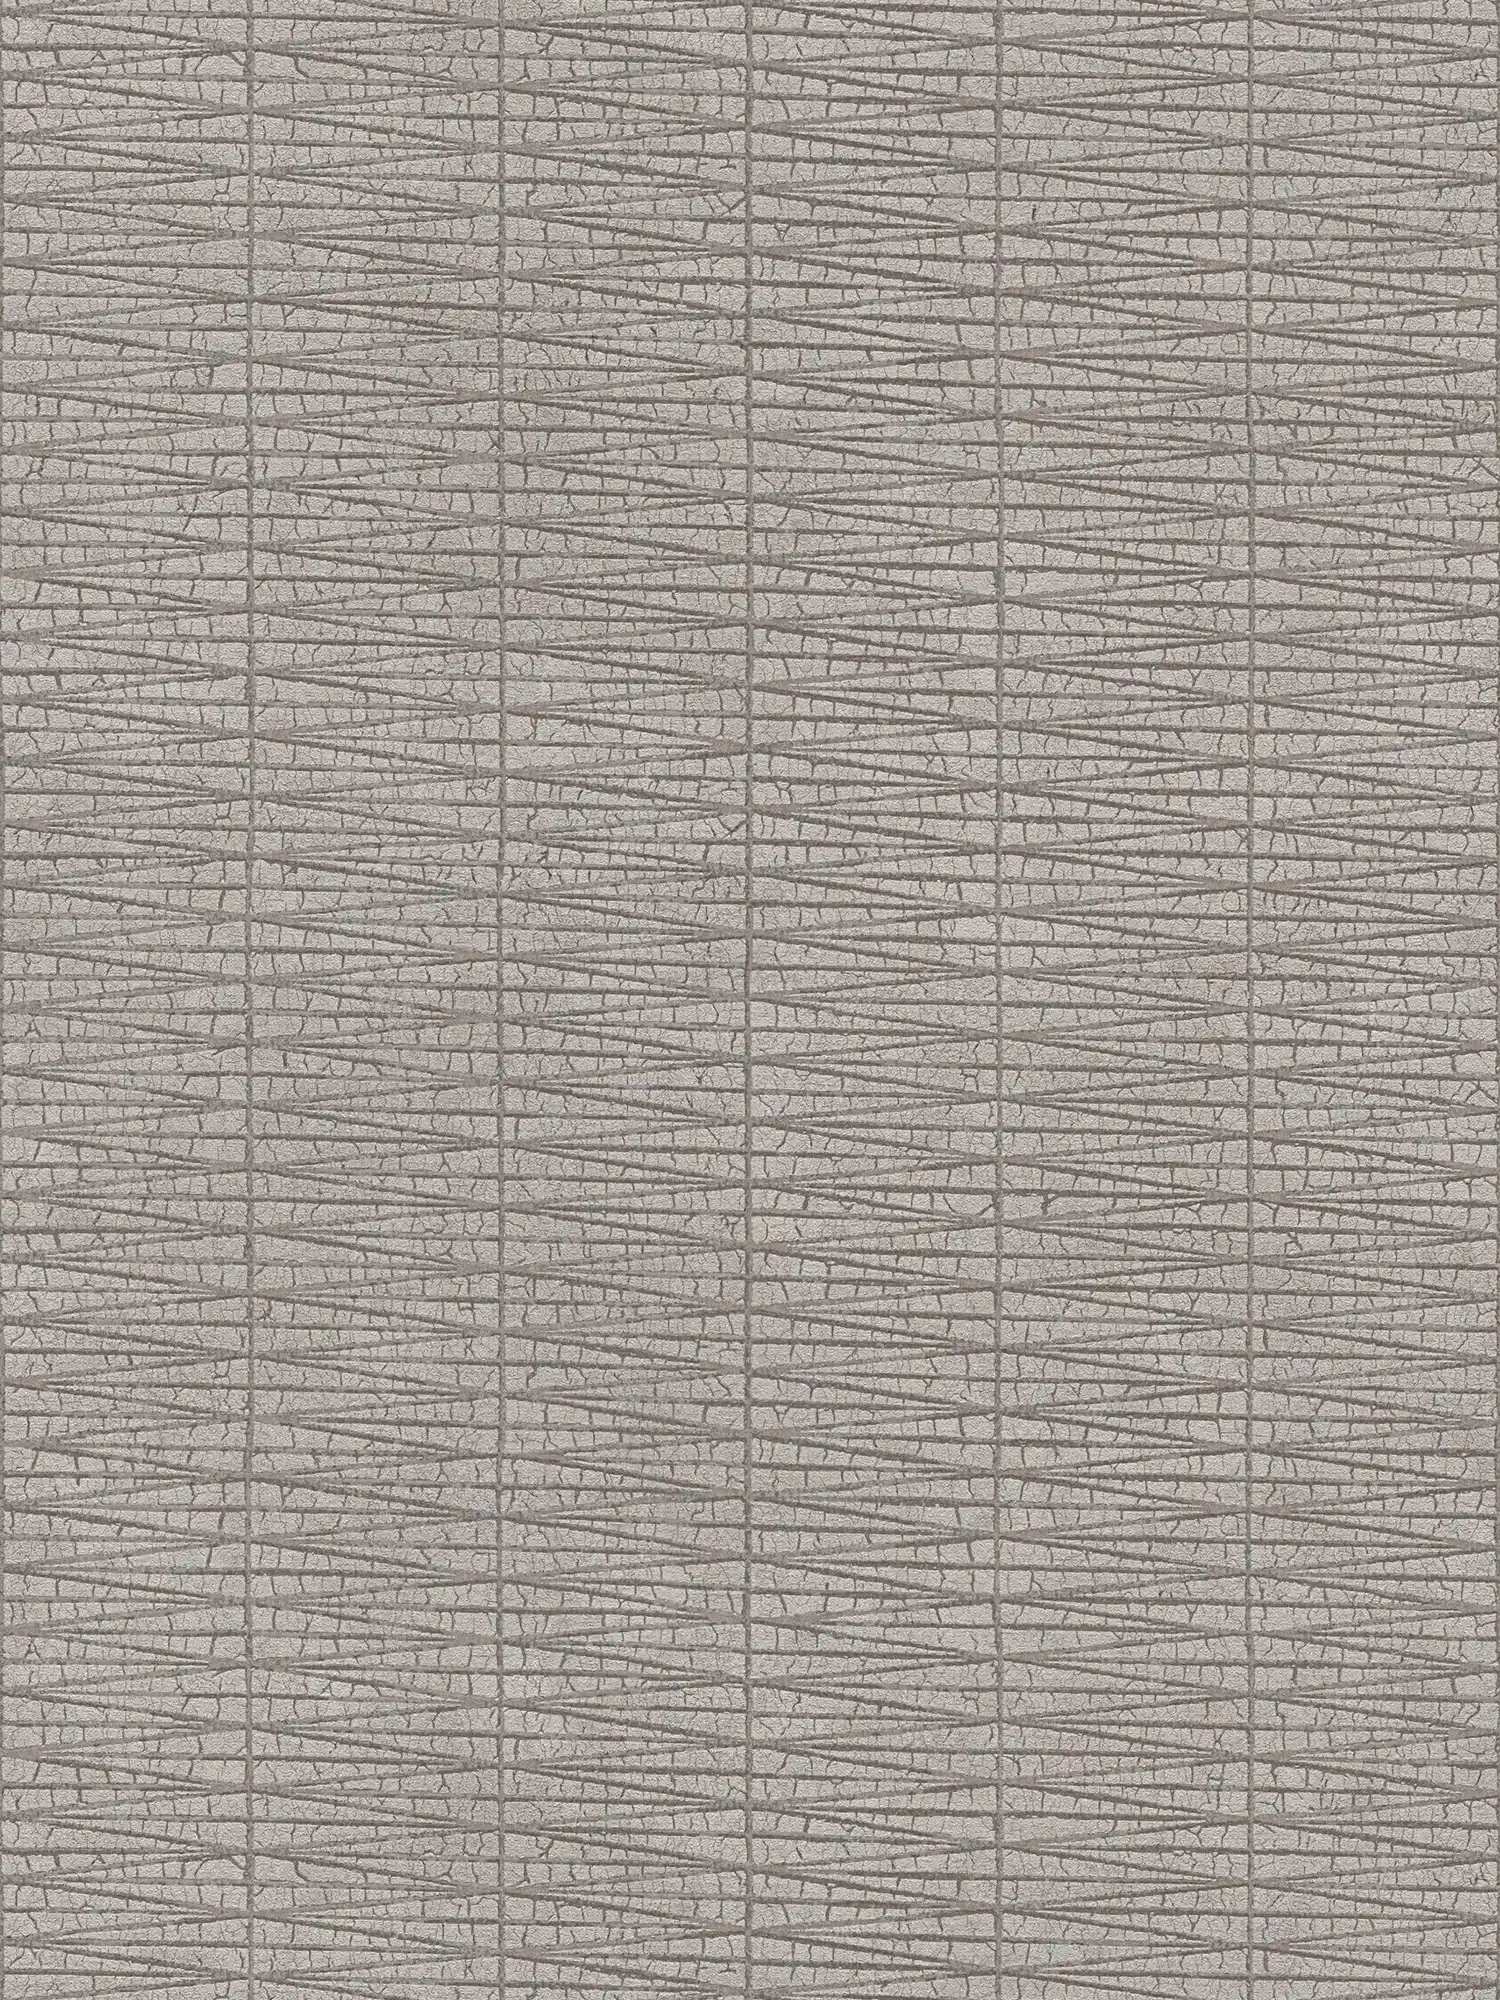 Grey wallpaper with line pattern and texture design
